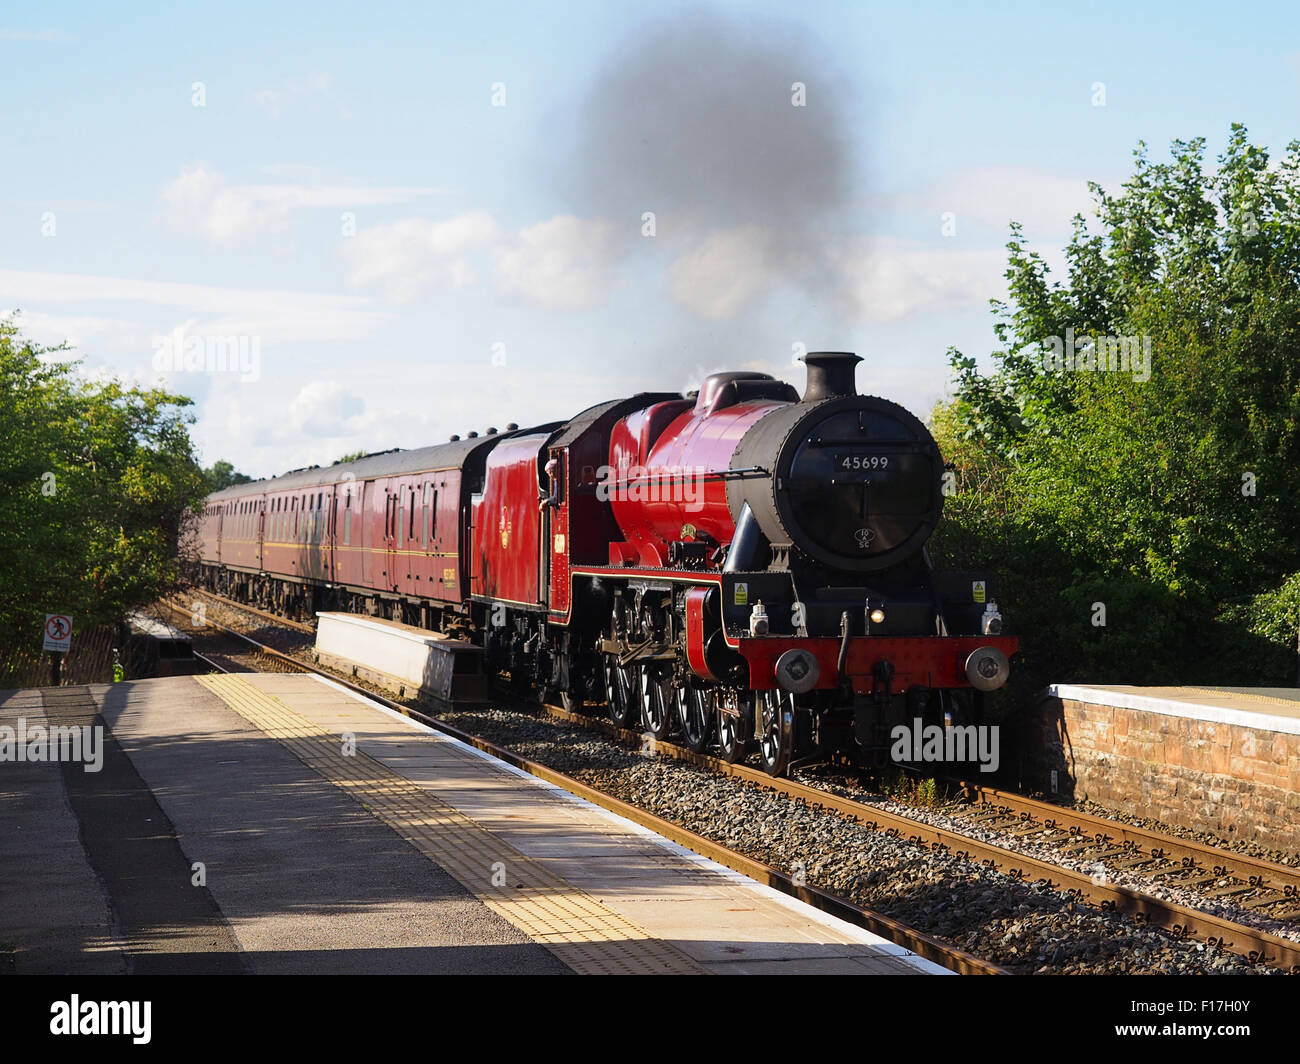 Steam train 45699 'Galatea' passing through Langwathby station on the Settle to Carlisle line in Cumbria, England. Stock Photo